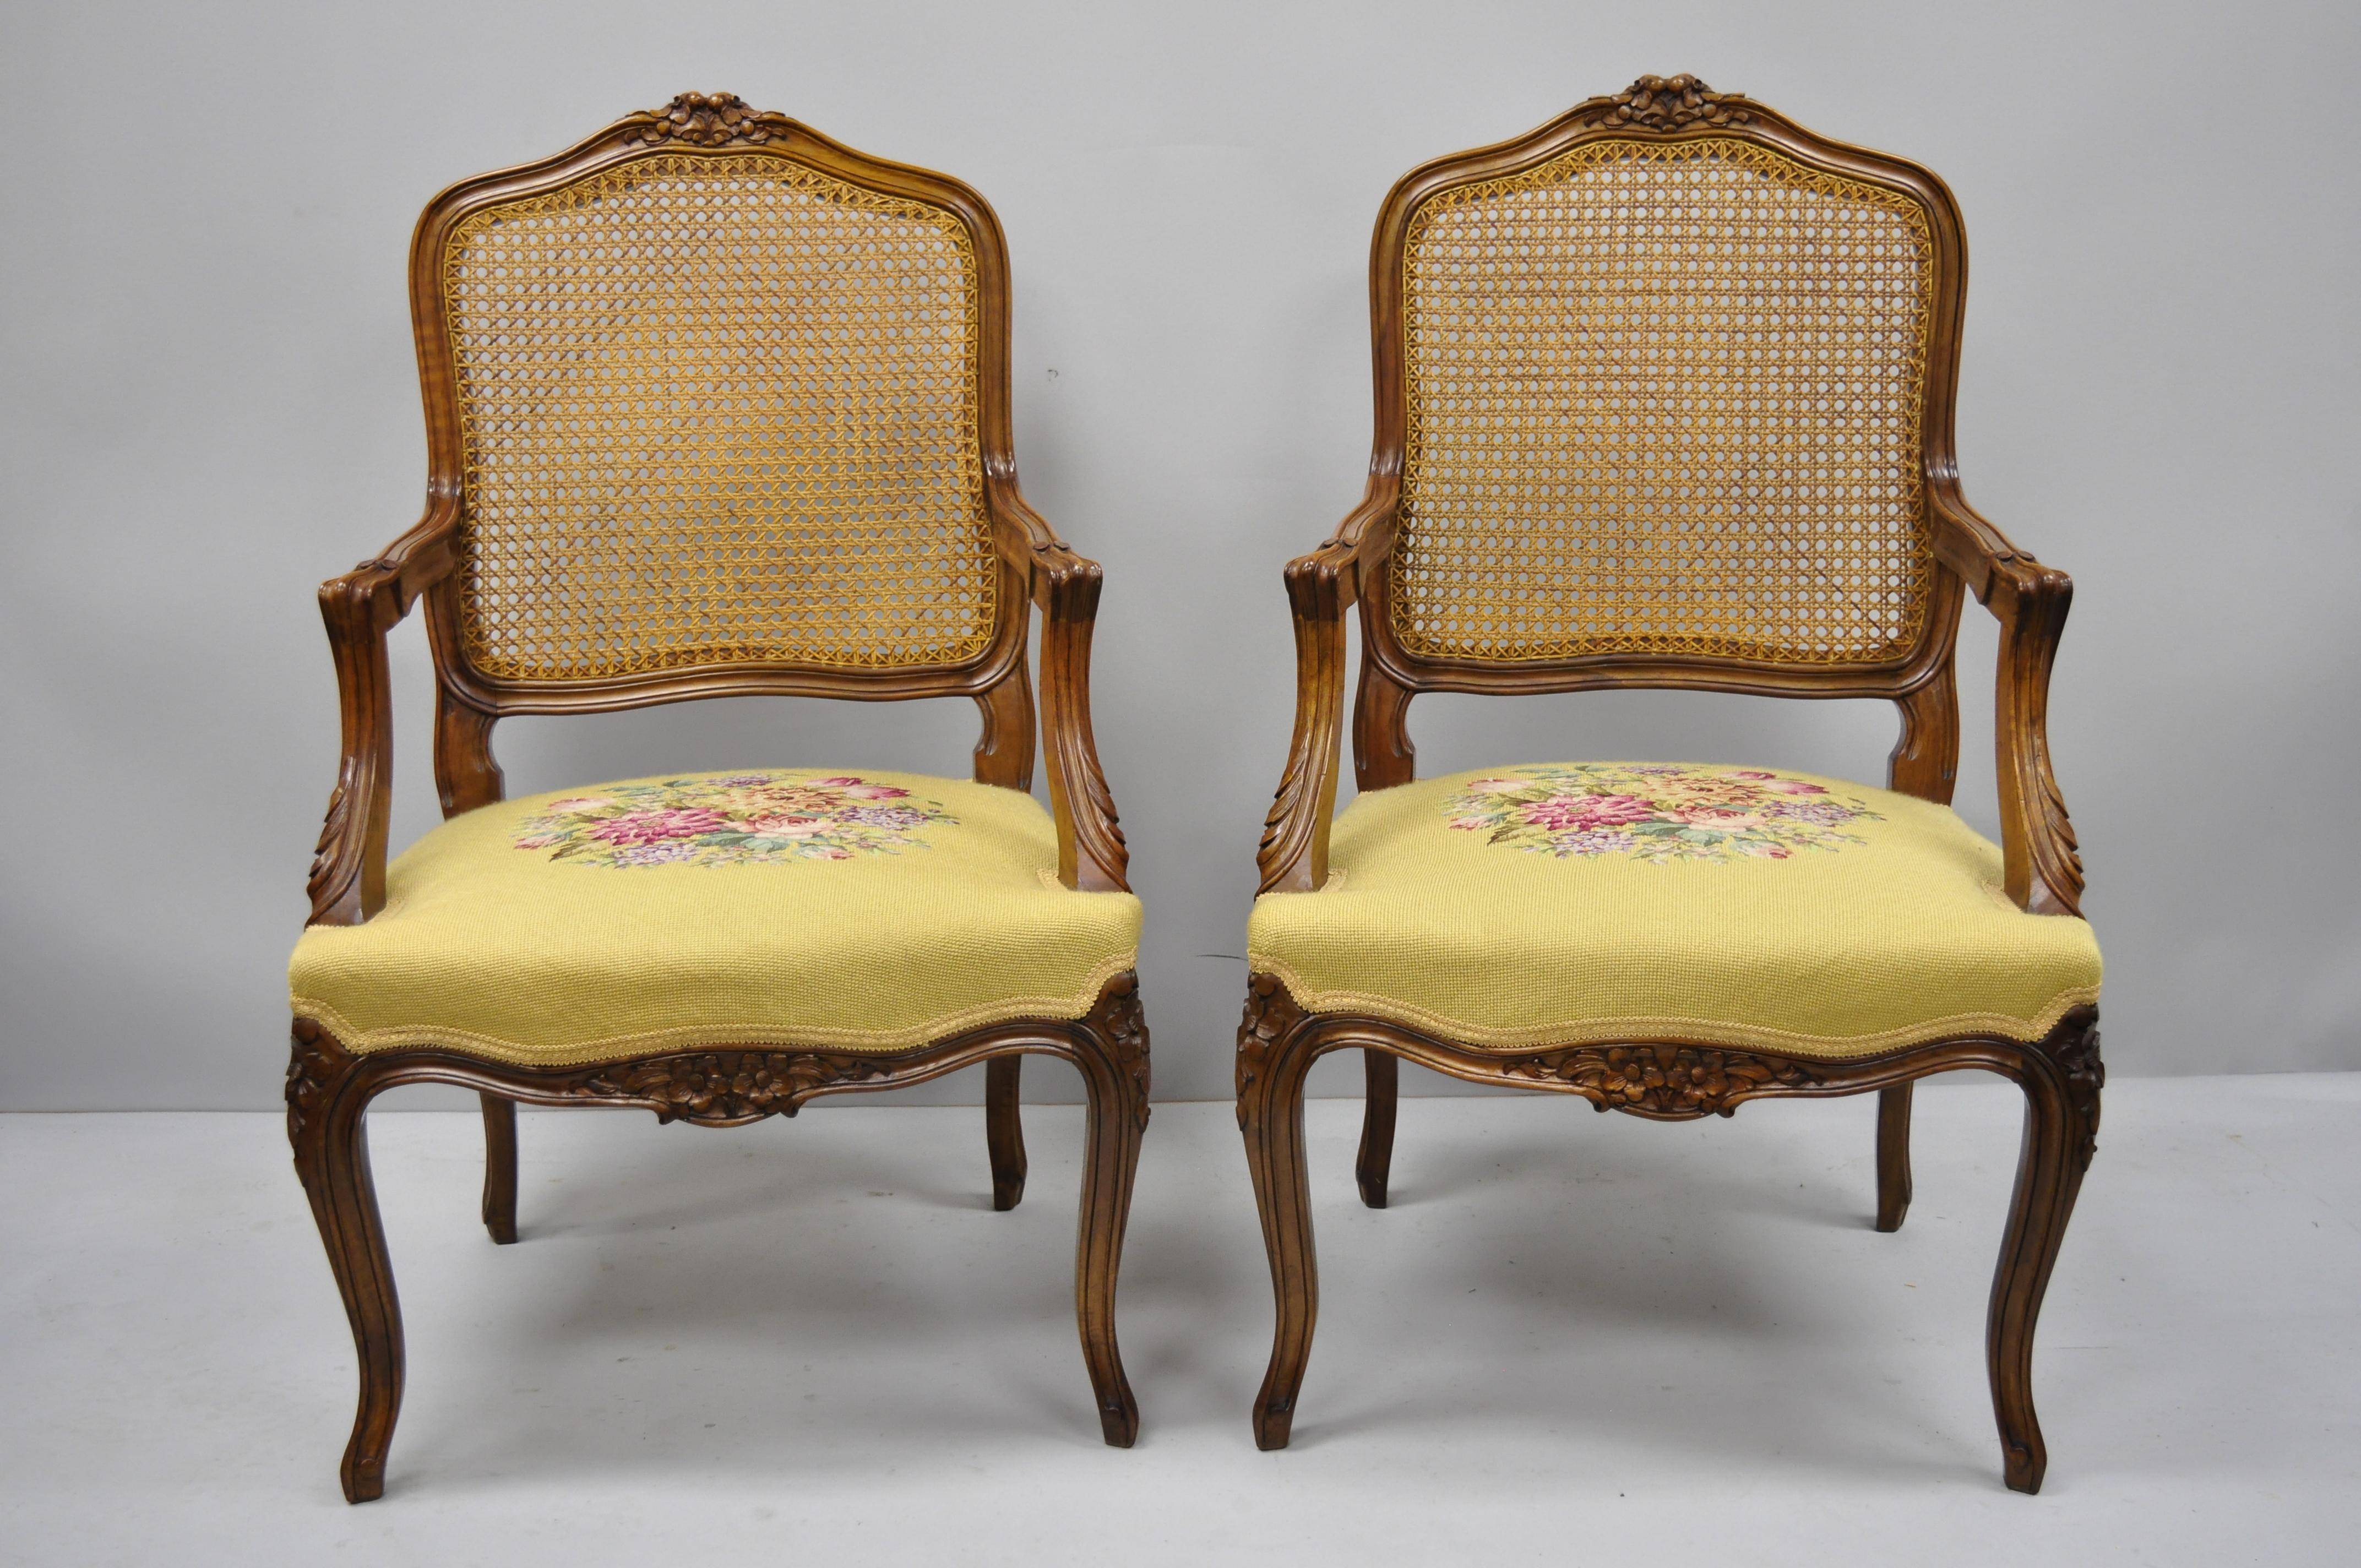 Pair of French Country Louis XV style cane back chair needlepoint armchairs. Items feature cane back, floral needlepoint upholstery, solid wood construction, nicely carved details, cabriole legs, great style and form, circa mid-20th century.